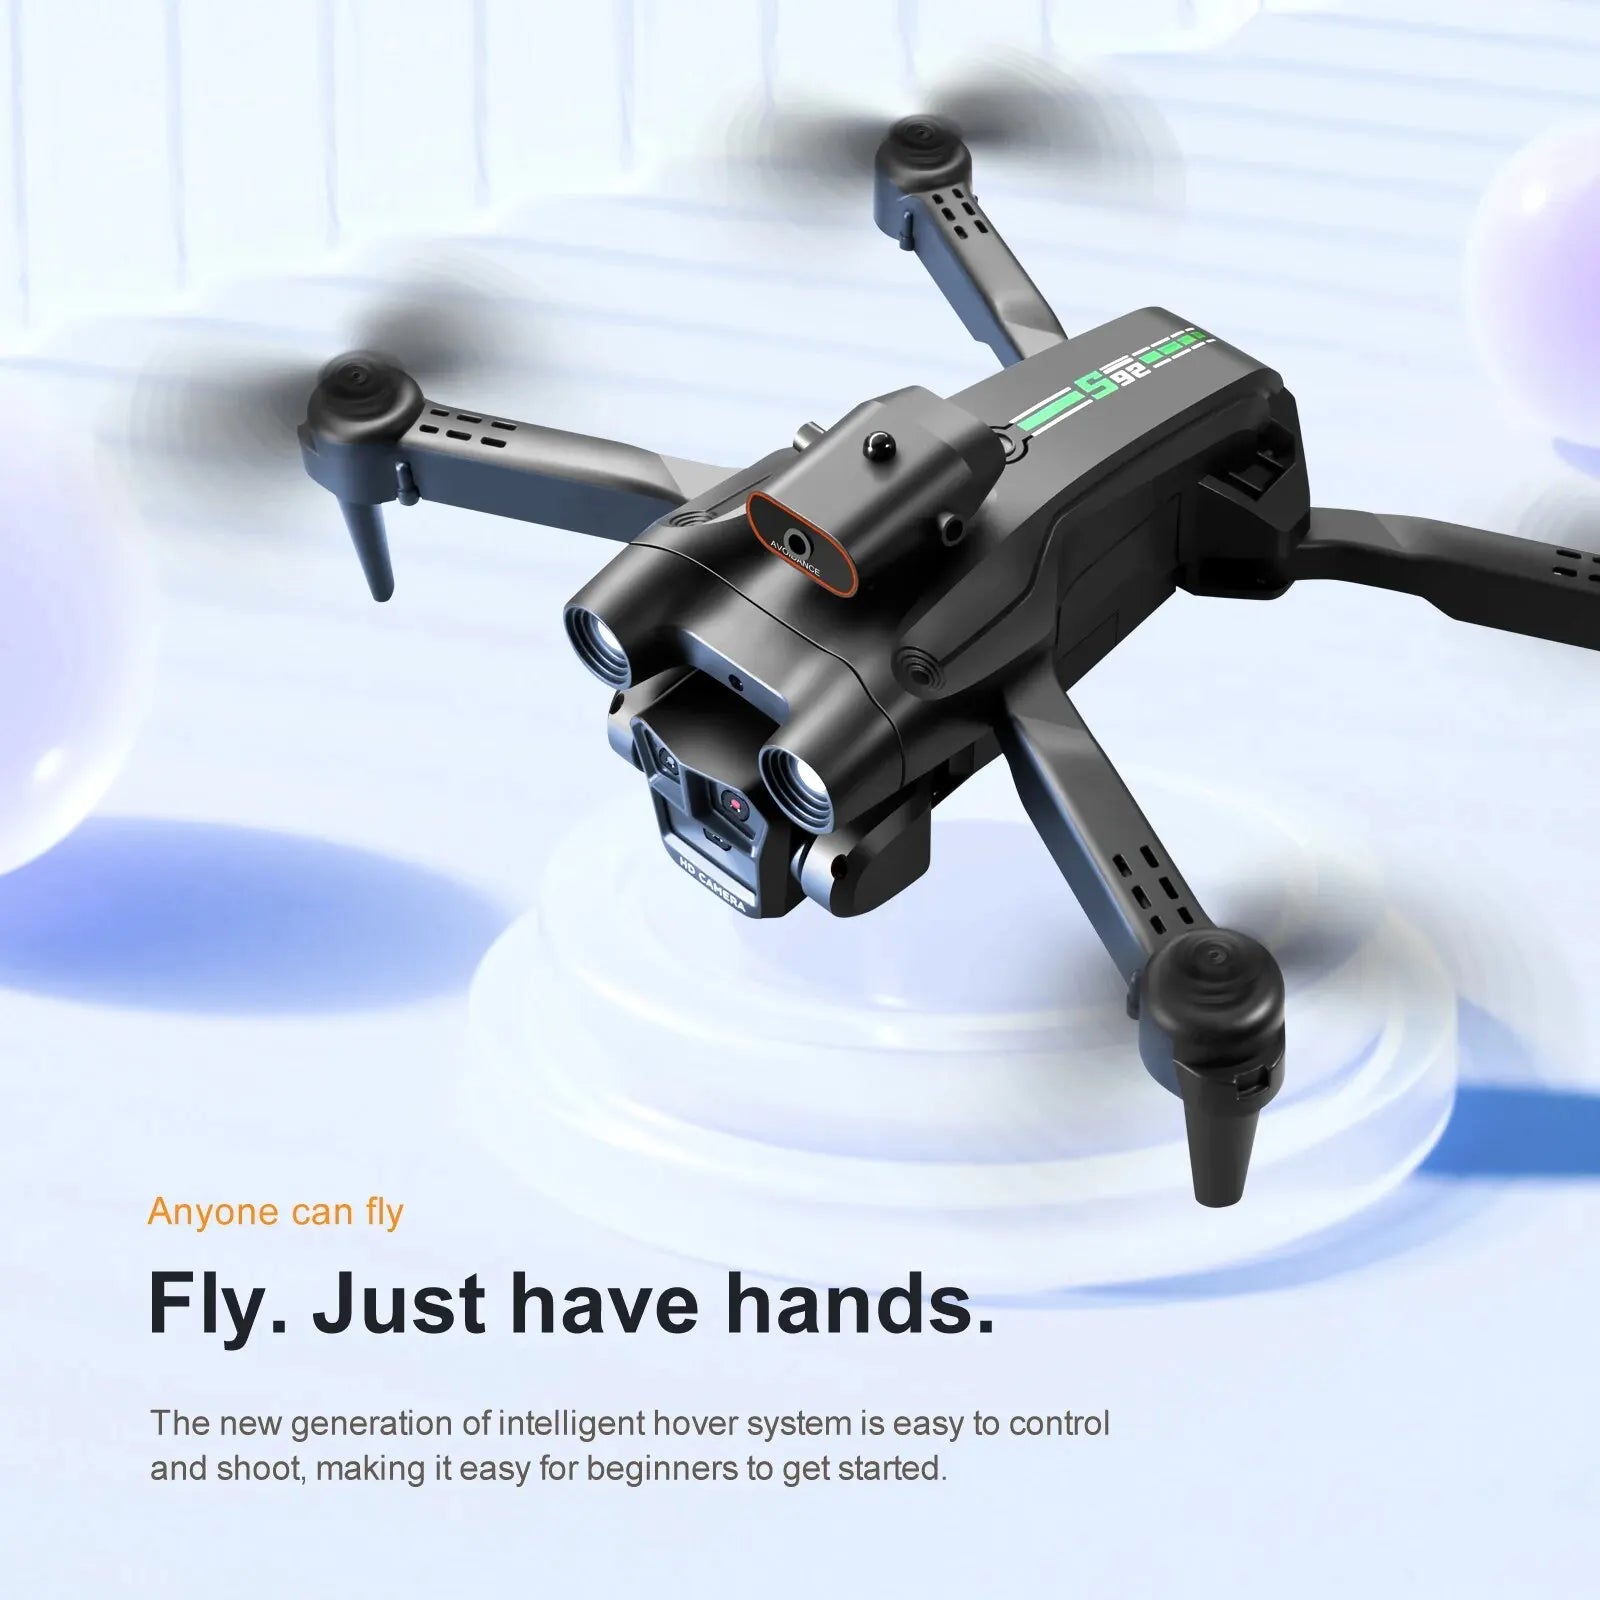 S92 Drone, the new generation of intelligent hover system is easy to control and shoot 